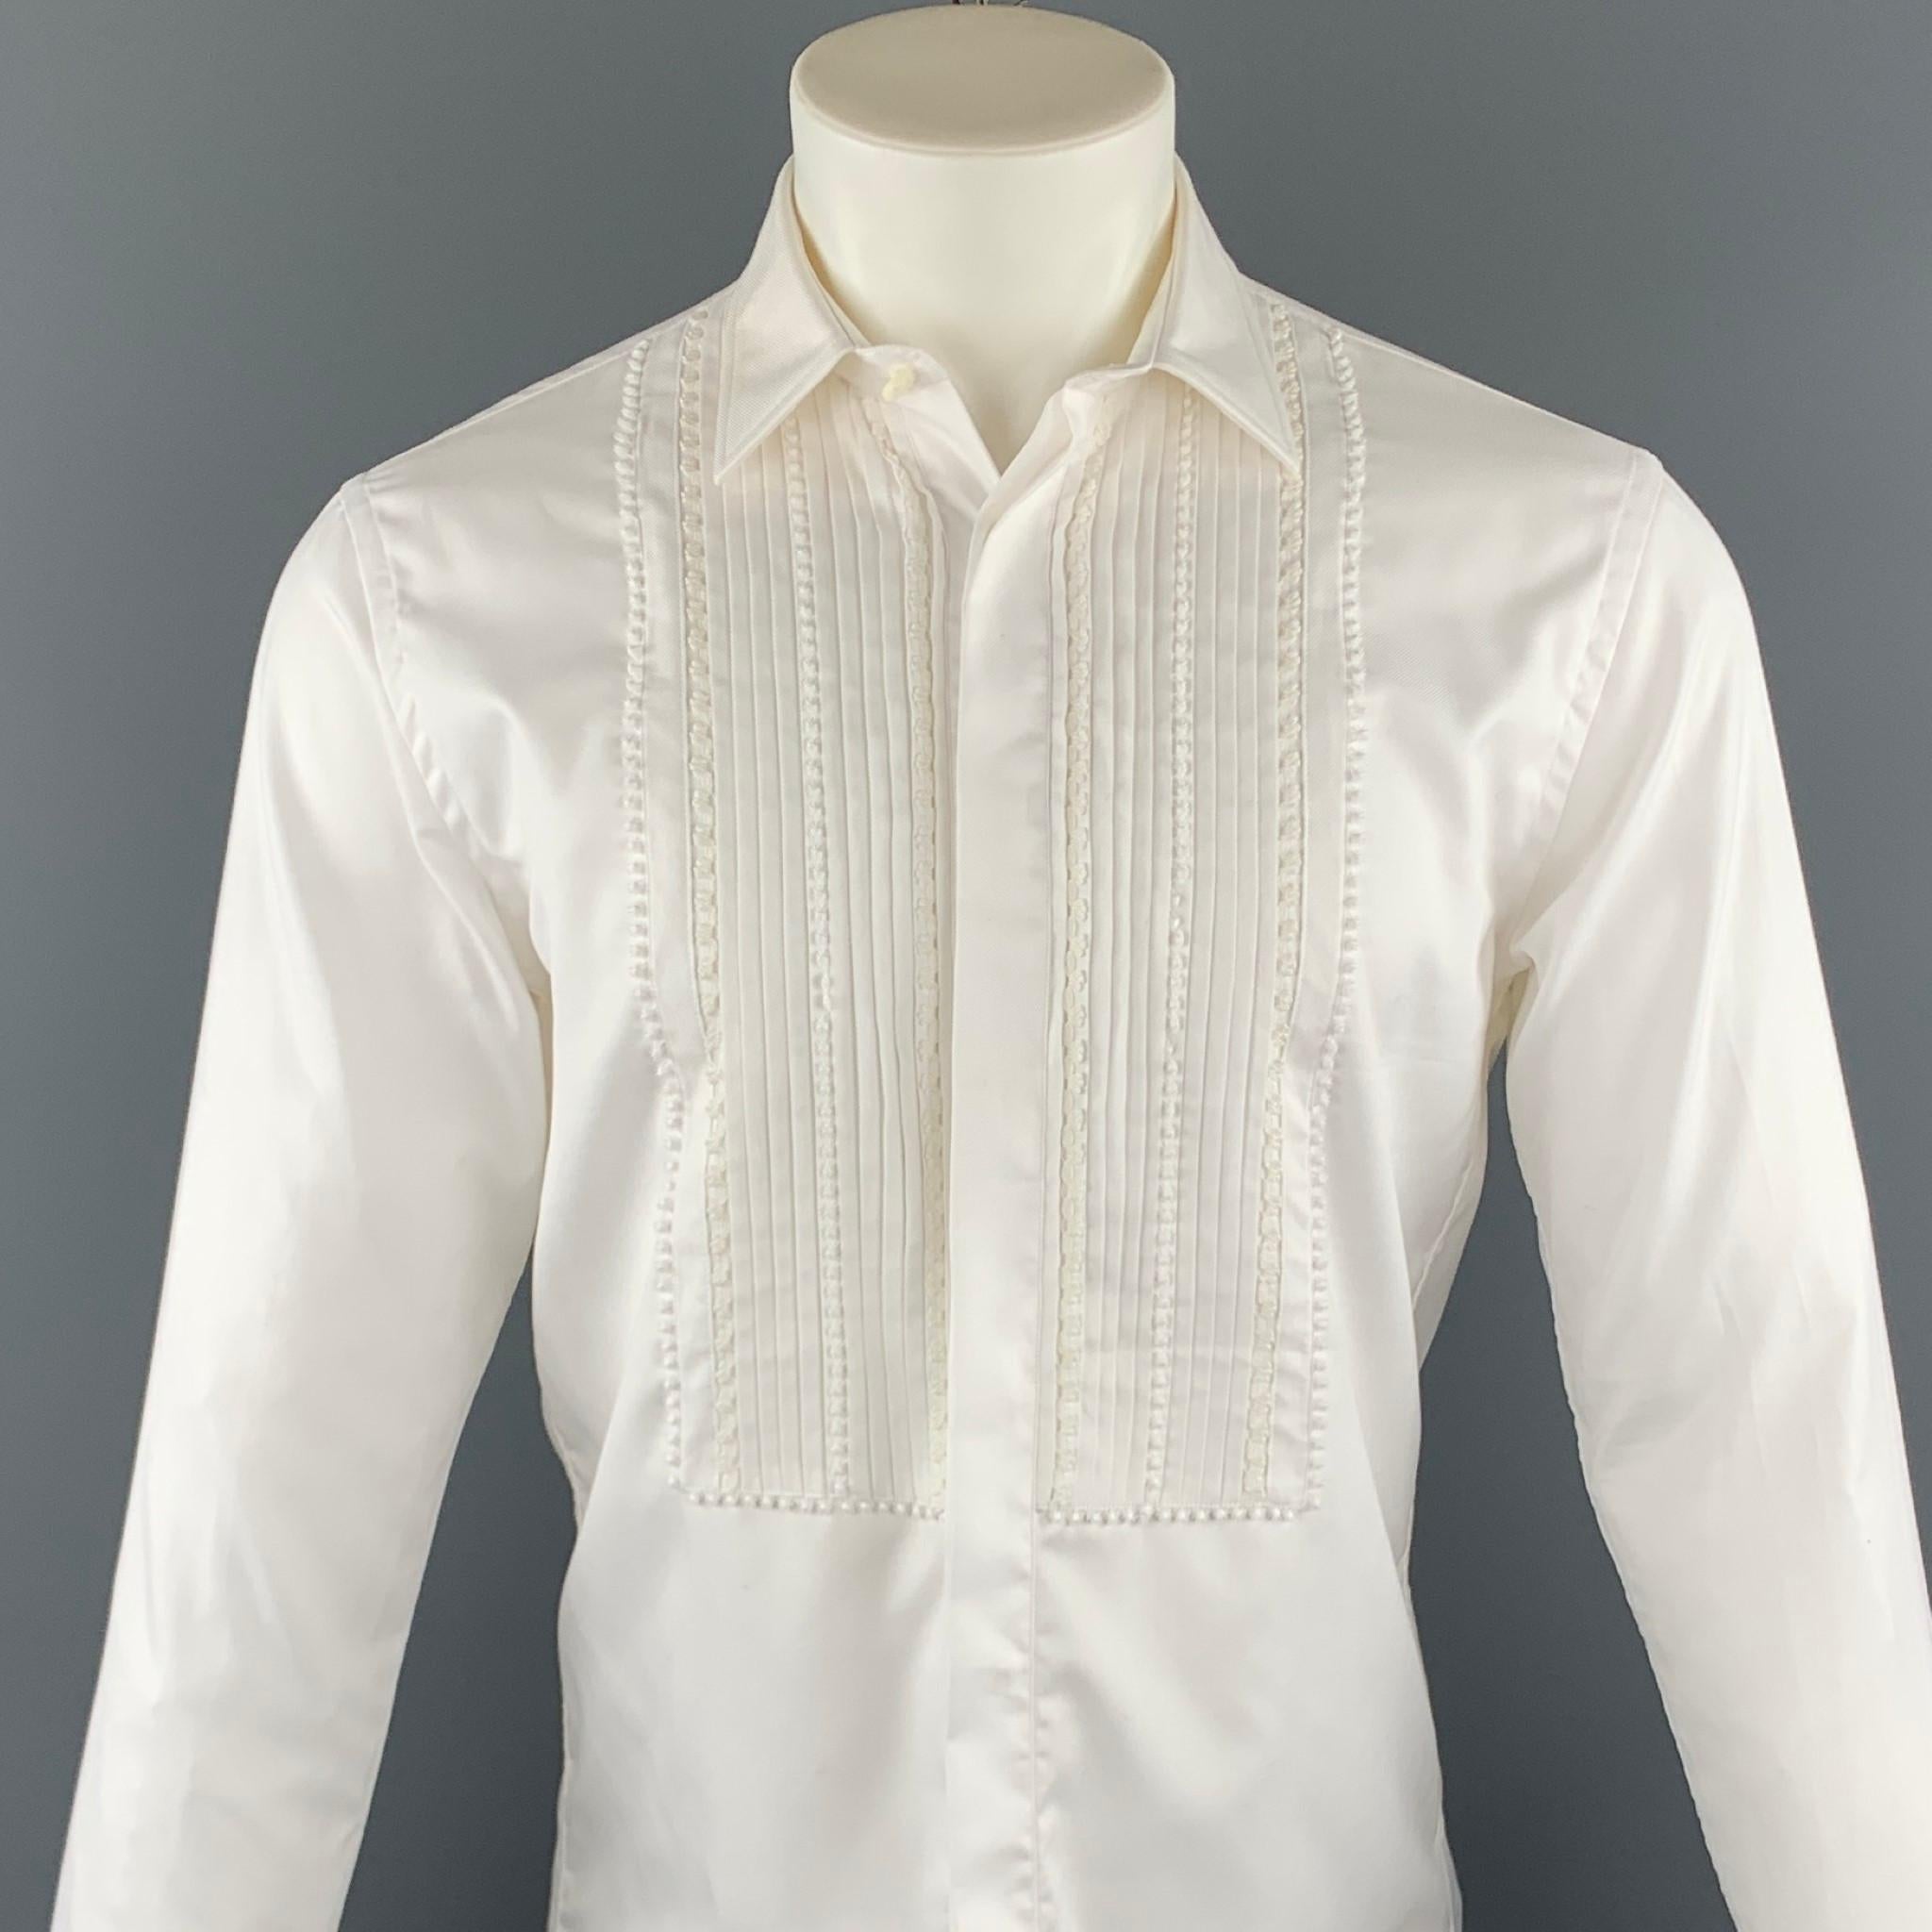 BURBERRY long sleeve shirt comes in a white pleated cotton featuring a tuxedo style, embroidered details, french cuffs, and a hidden button closure. Minor discoloration. As-Is.

Good Pre-Owned Condition.
Marked: 15 / 38

Measurements:
 
Shoulder: